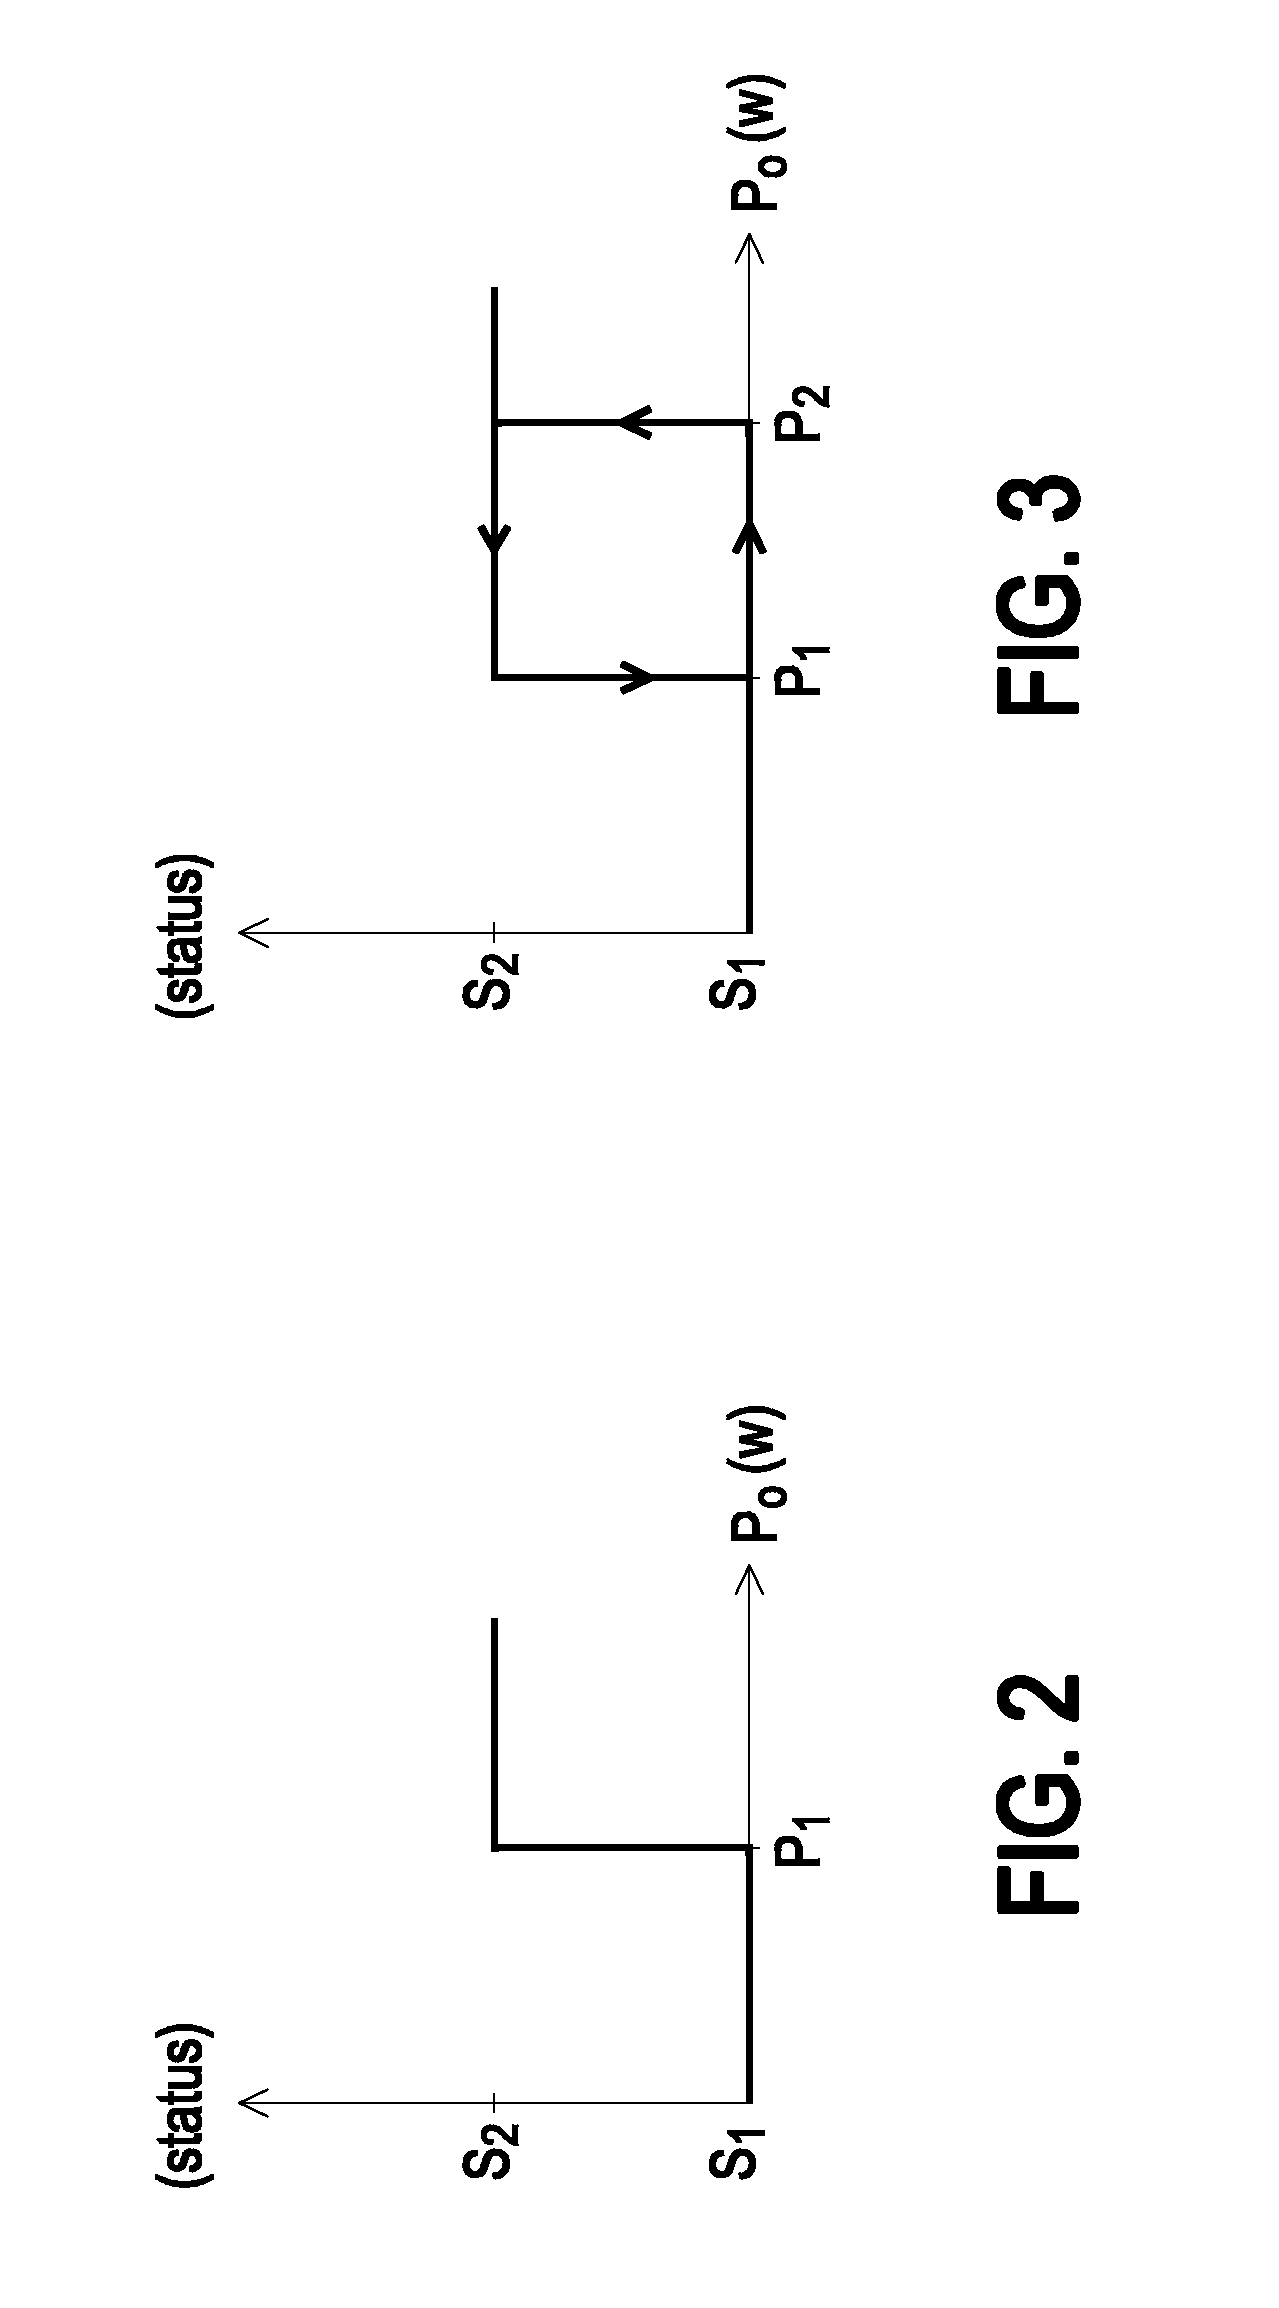 Two-stage switching power supply